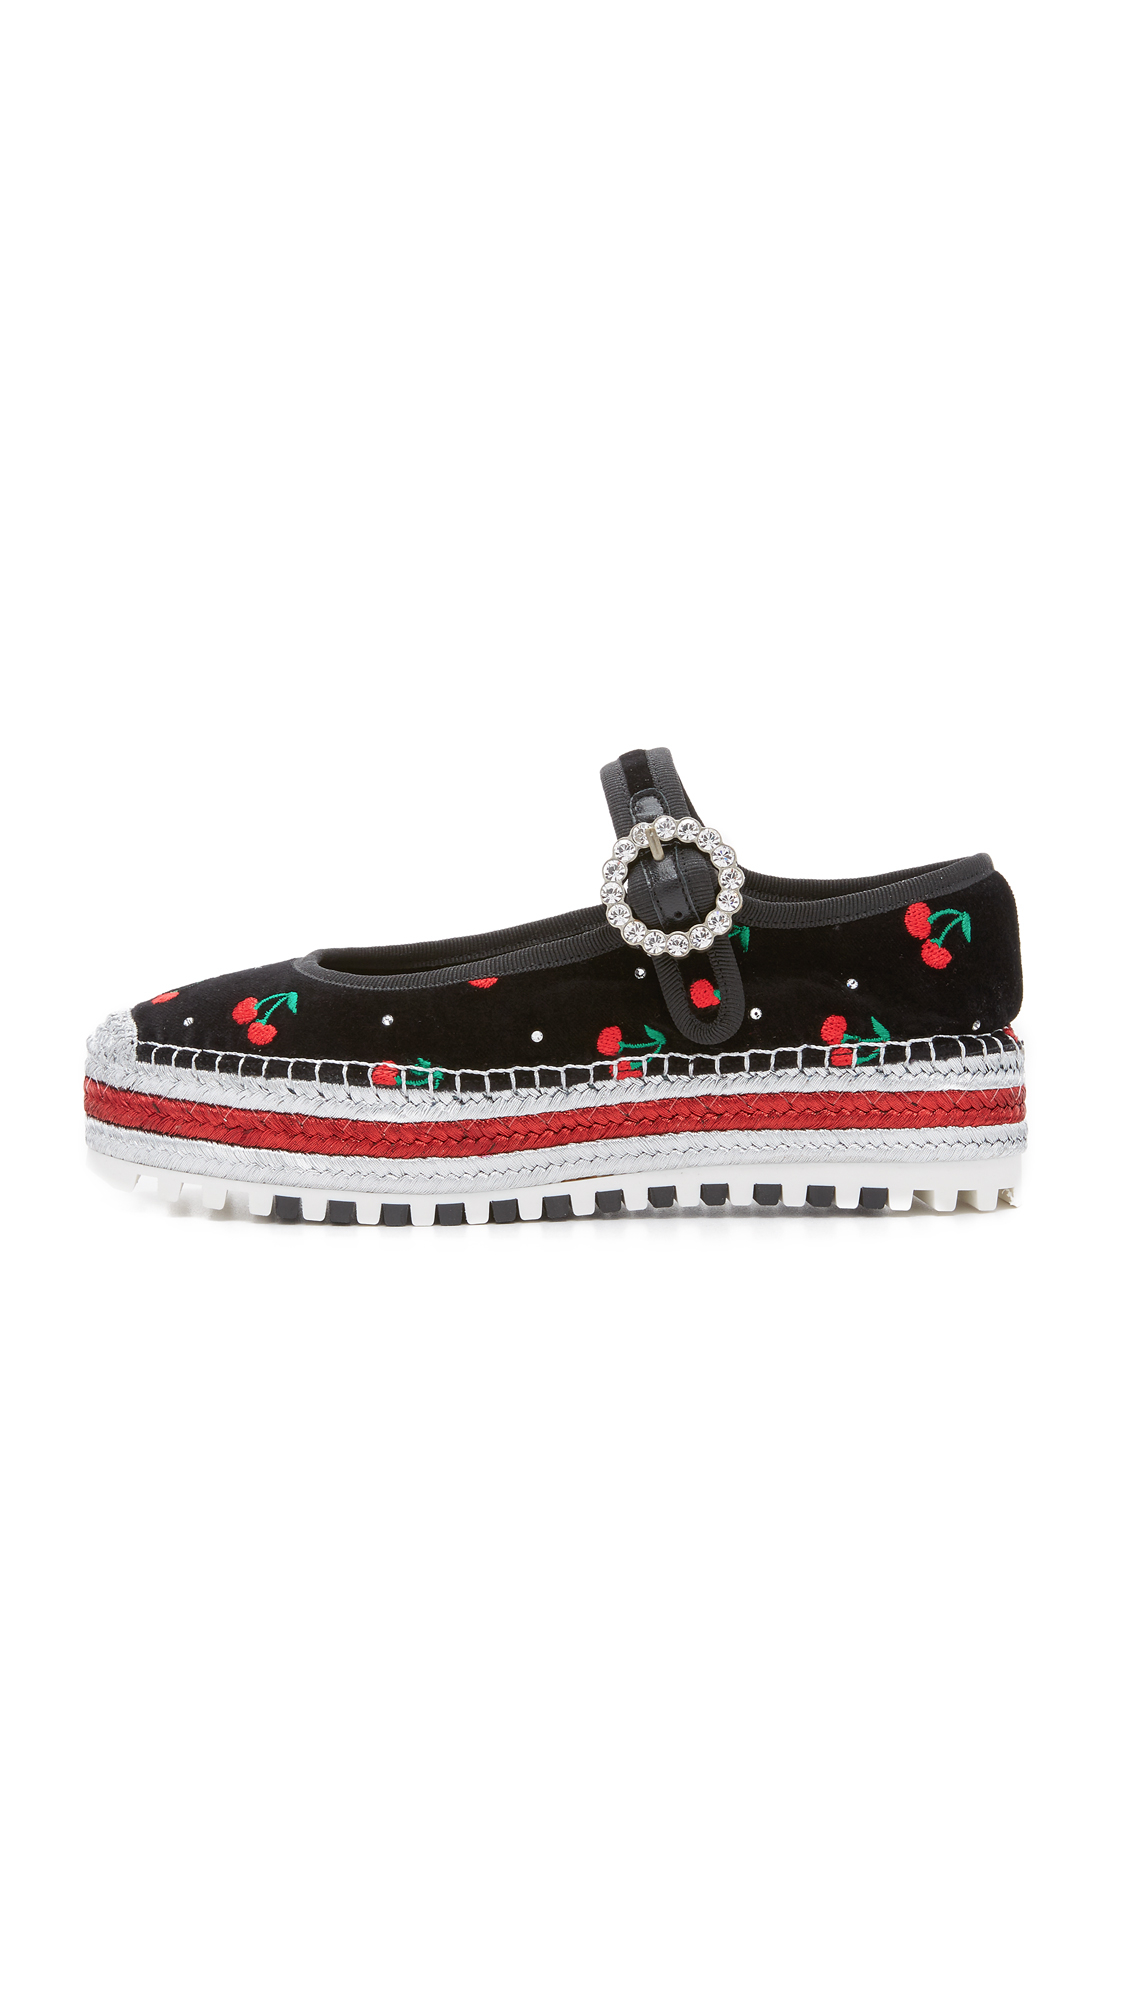 Marc By Marc Jacobs Suzi Cherry Mary Jane Espadrilles in Black | Lyst